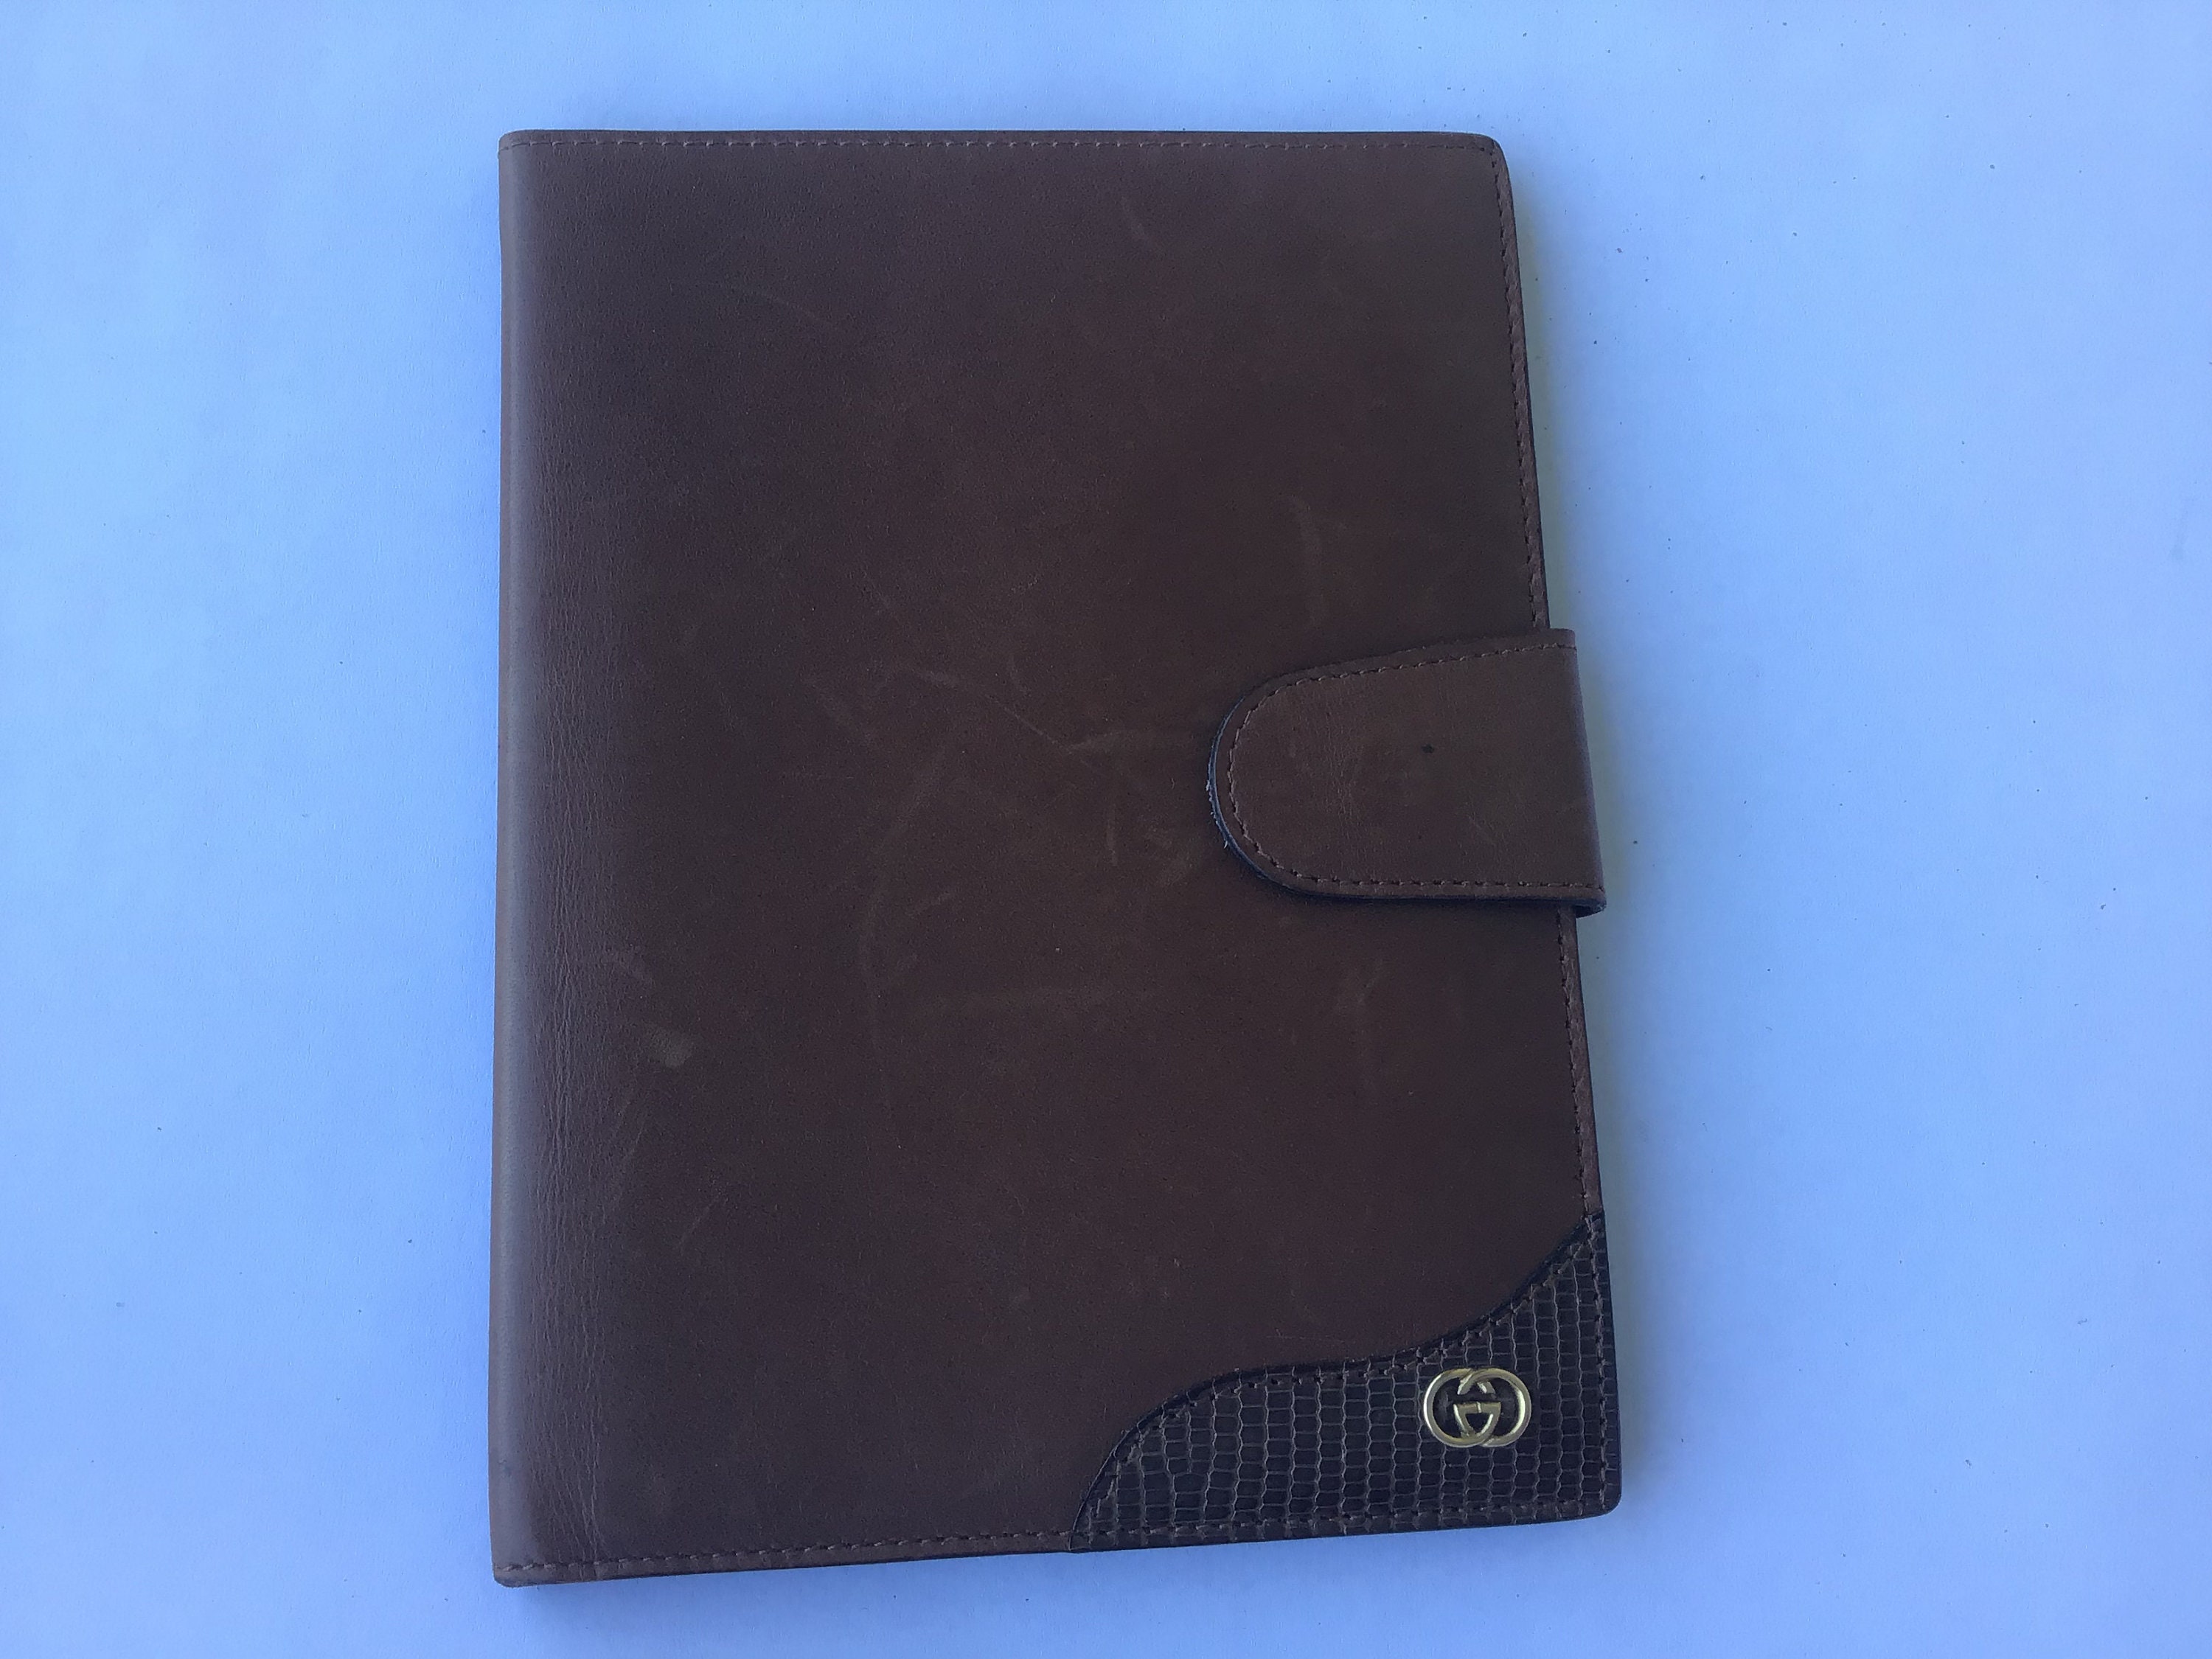 Gucci Brown Passport Cover — Frostytch